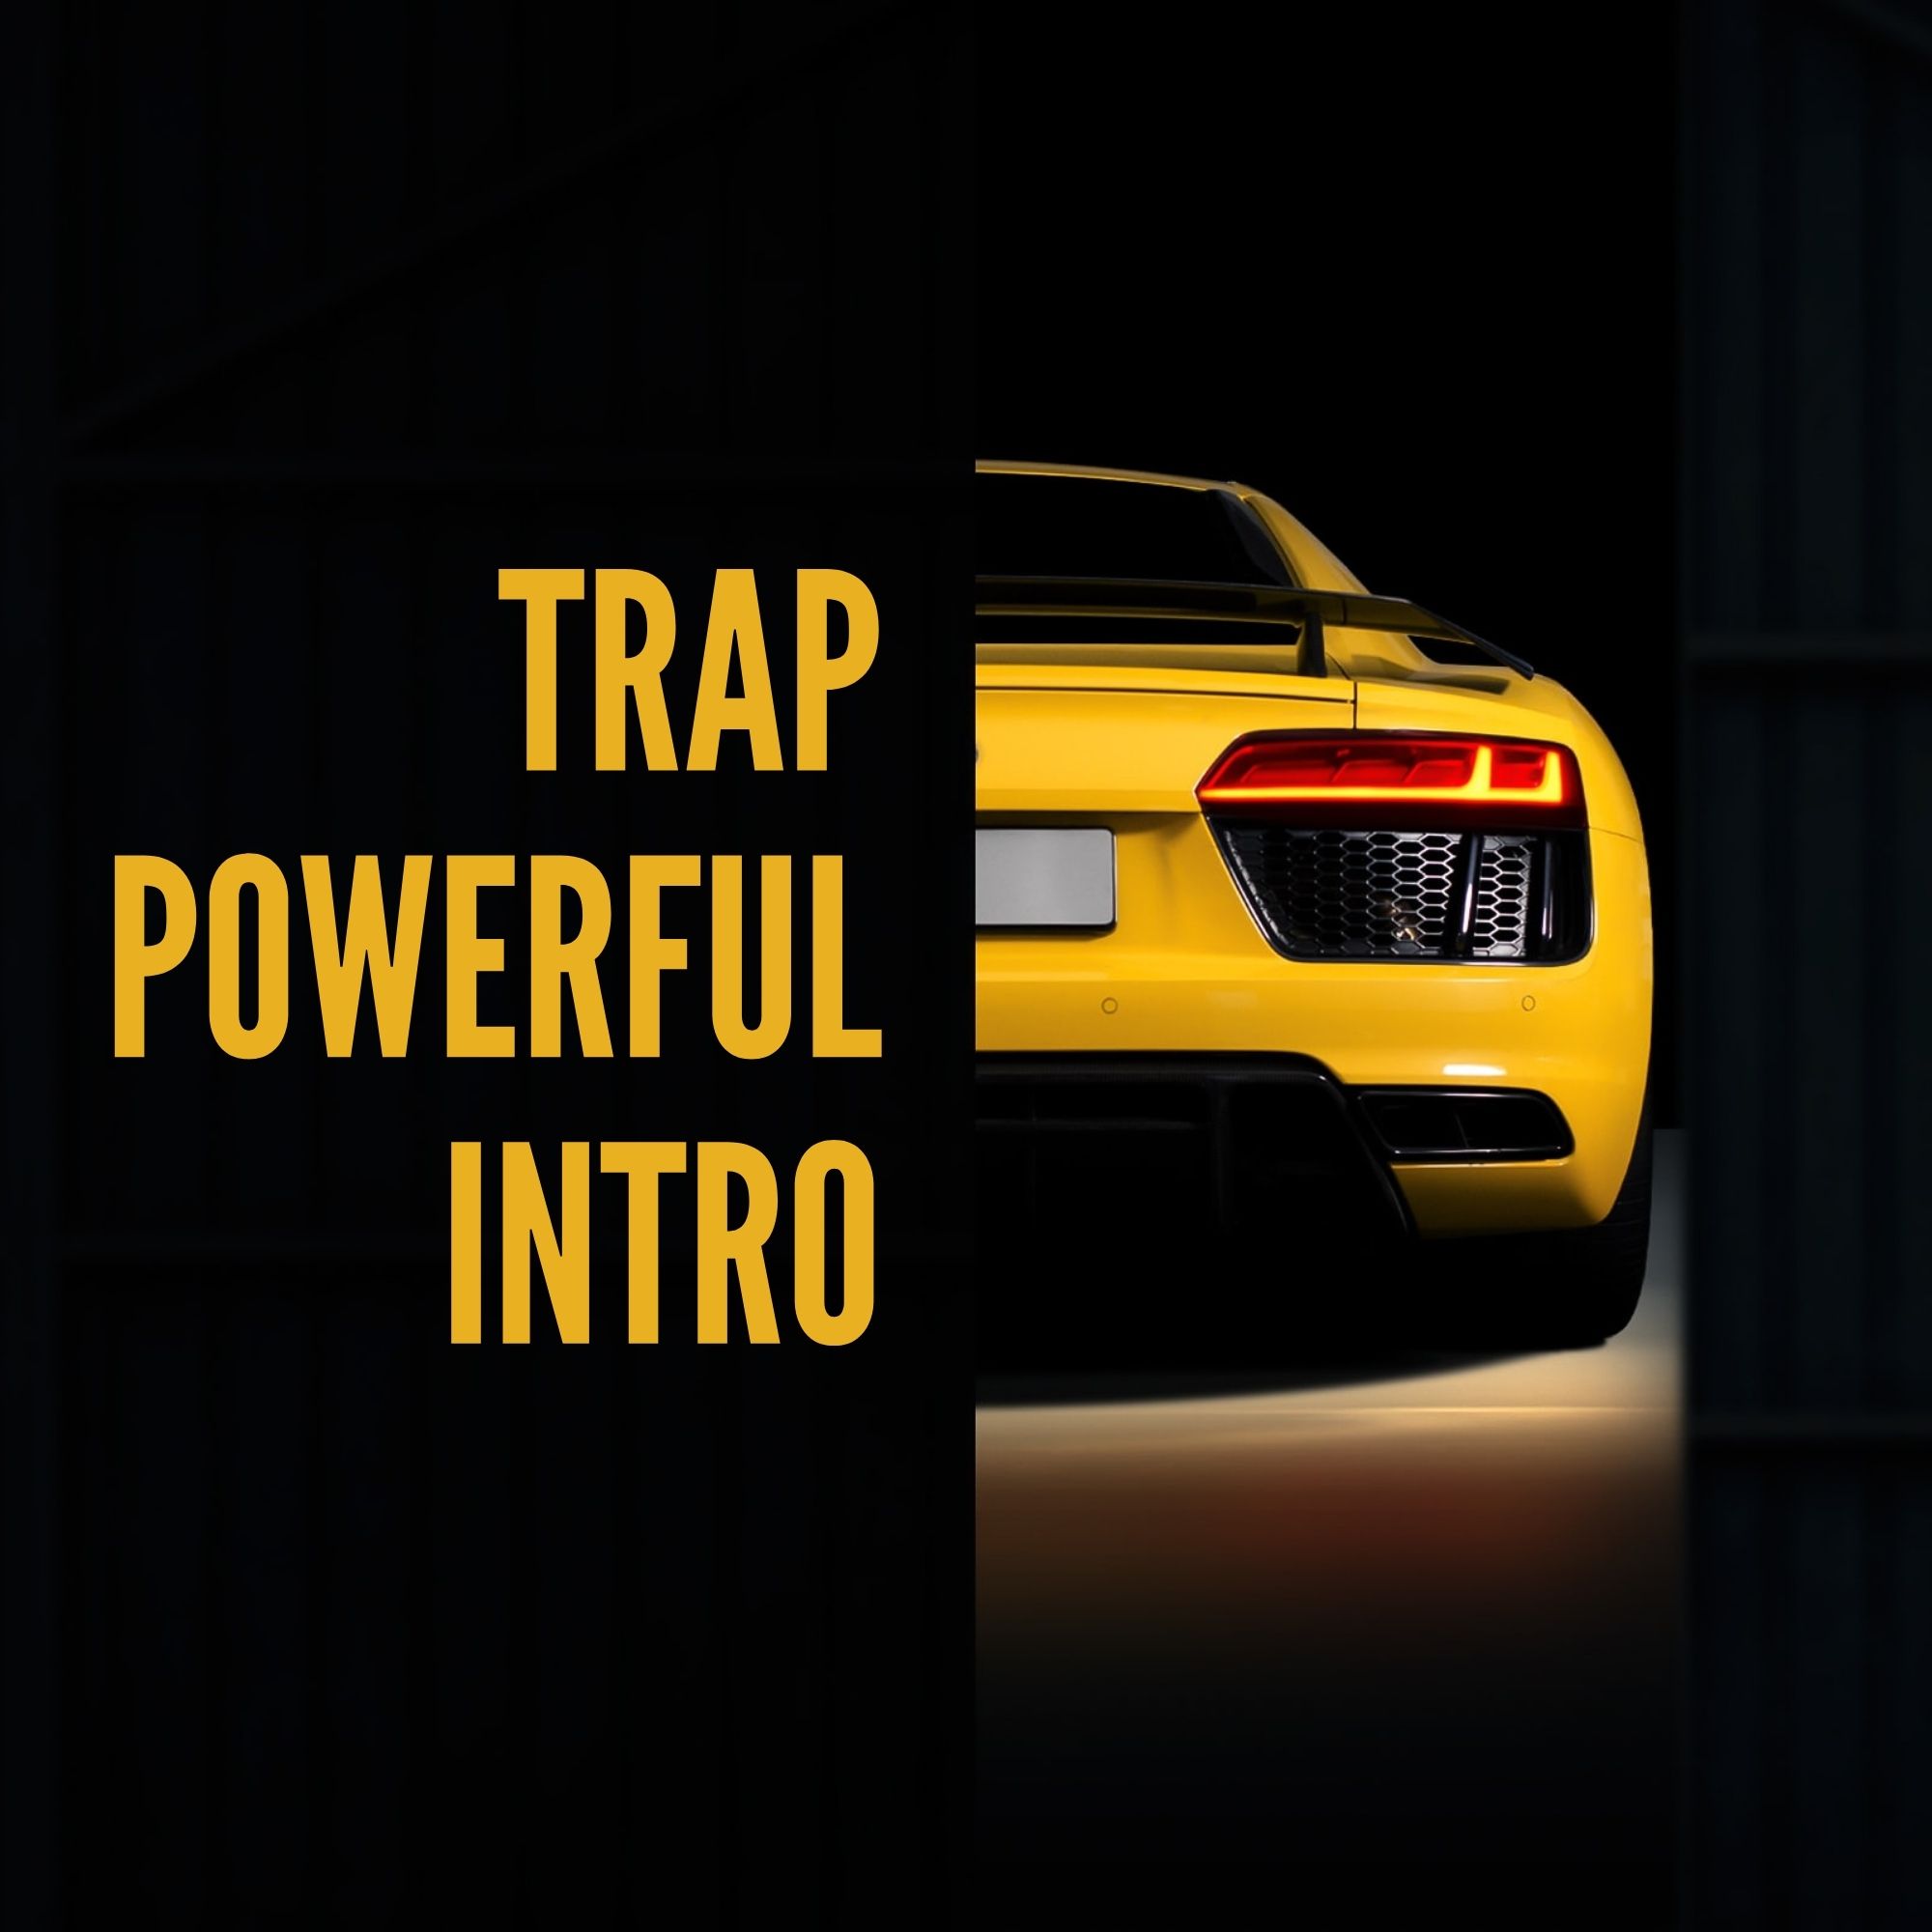 Trap Powerful Lucky Intro